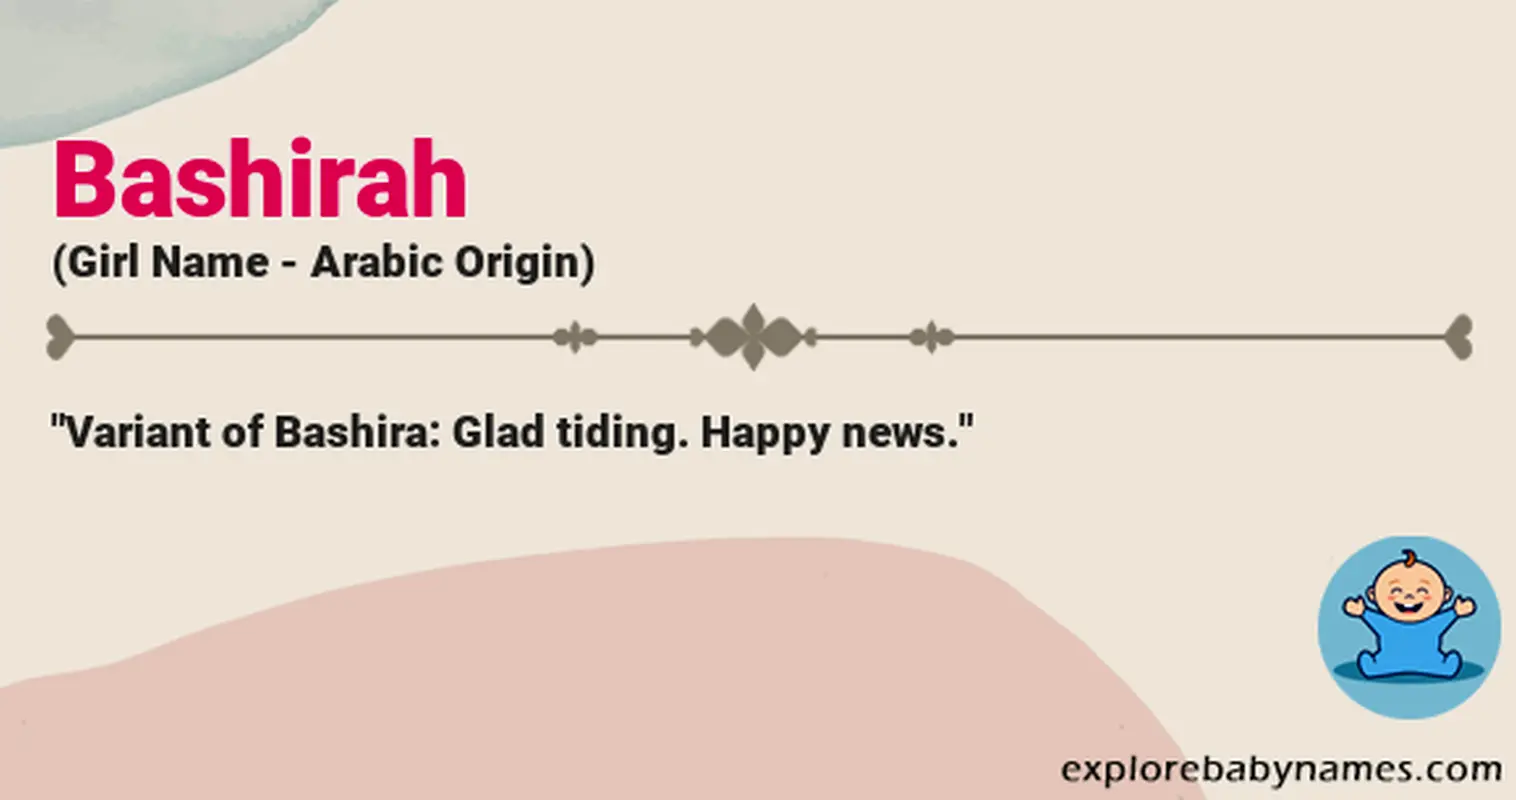 Meaning of Bashirah